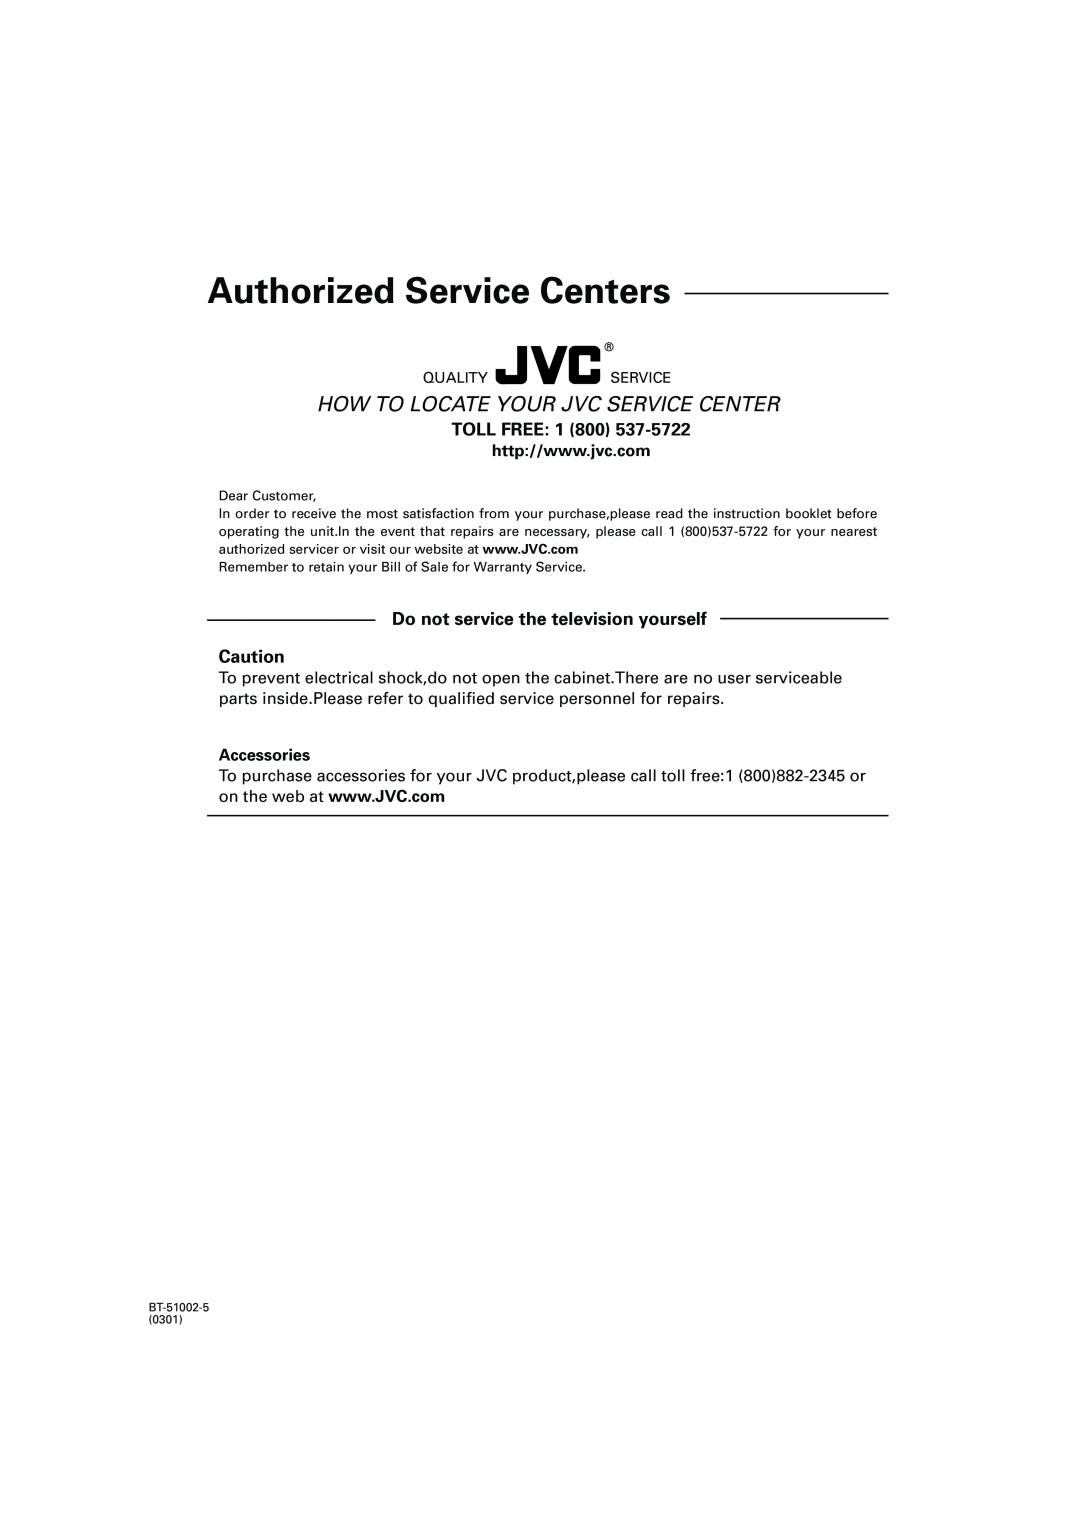 JVC RX-F10S manual Authorized Service Centers, How To Locate Your Jvc Service Center, TOLL FREE: 1 800, Accessories 